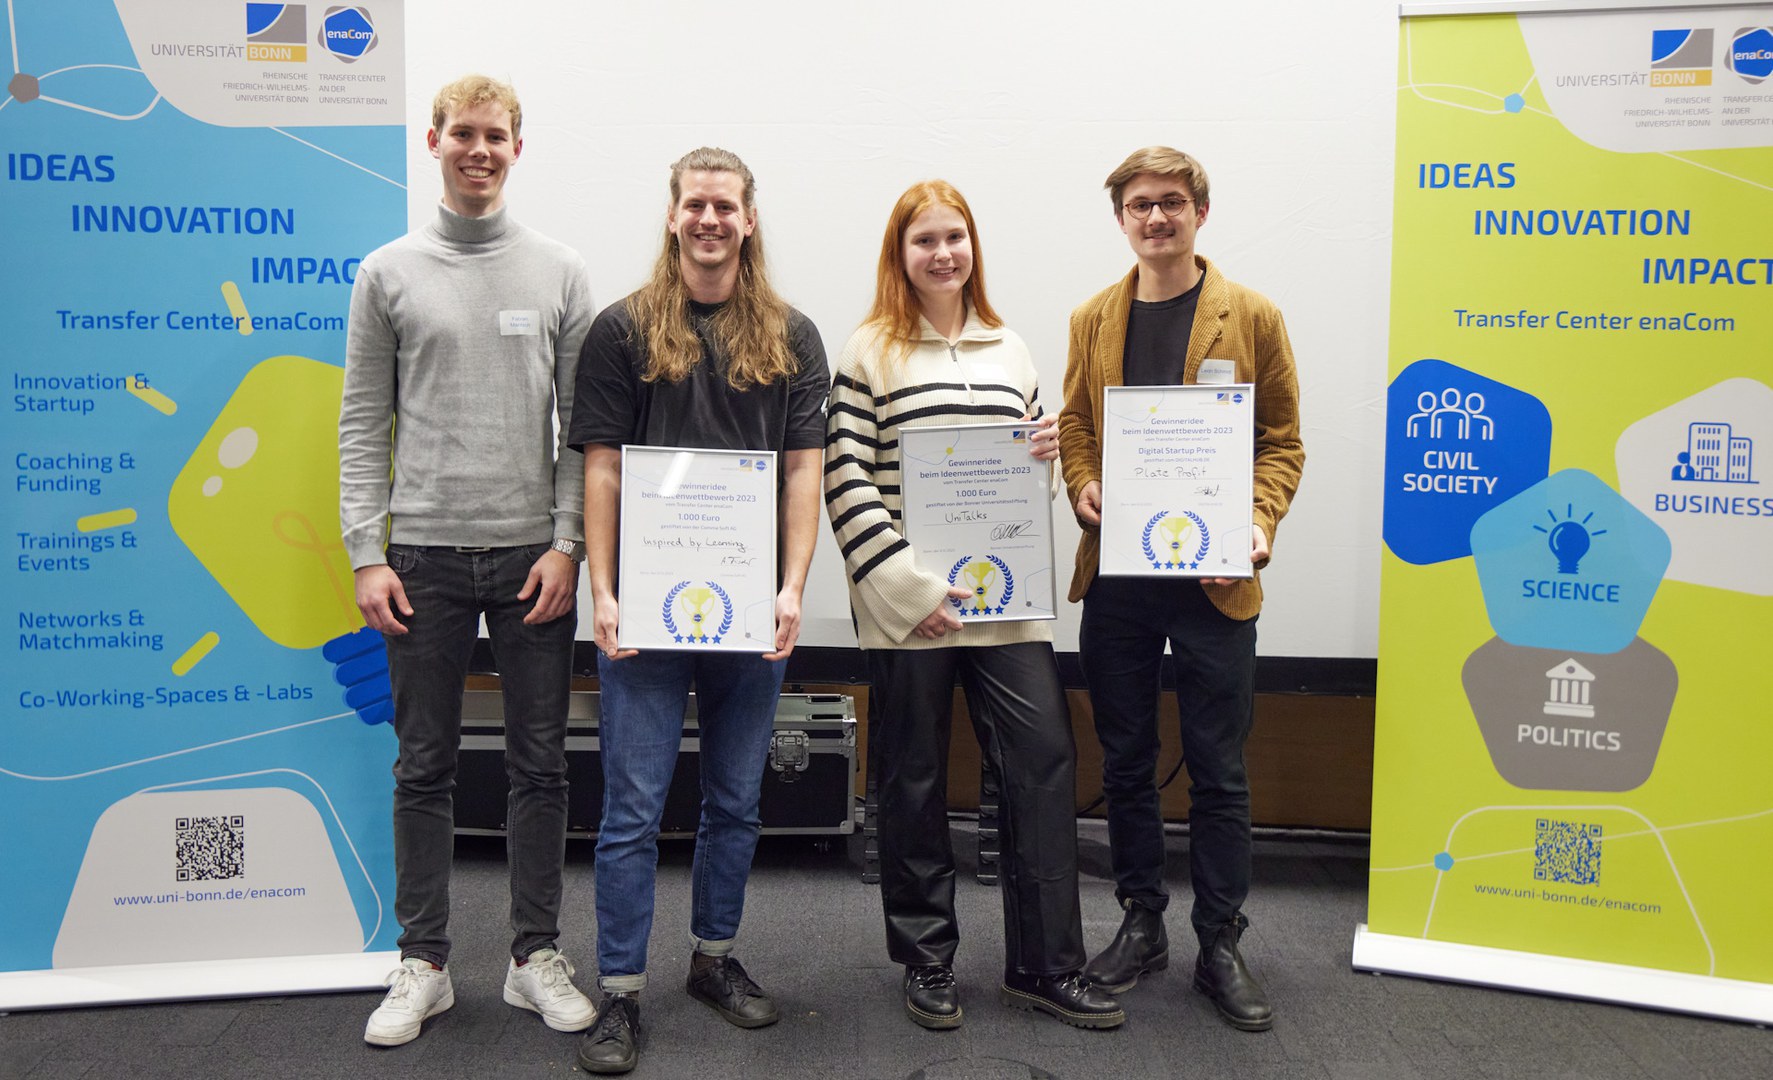 The winners of the ideas competition - Fabian Mantsch and Lars Pfleider ("Inspired by Learning"), Daria Kononenko ("UniTalks") and Leon Schmidt ("PlateProfit") (from left to right)